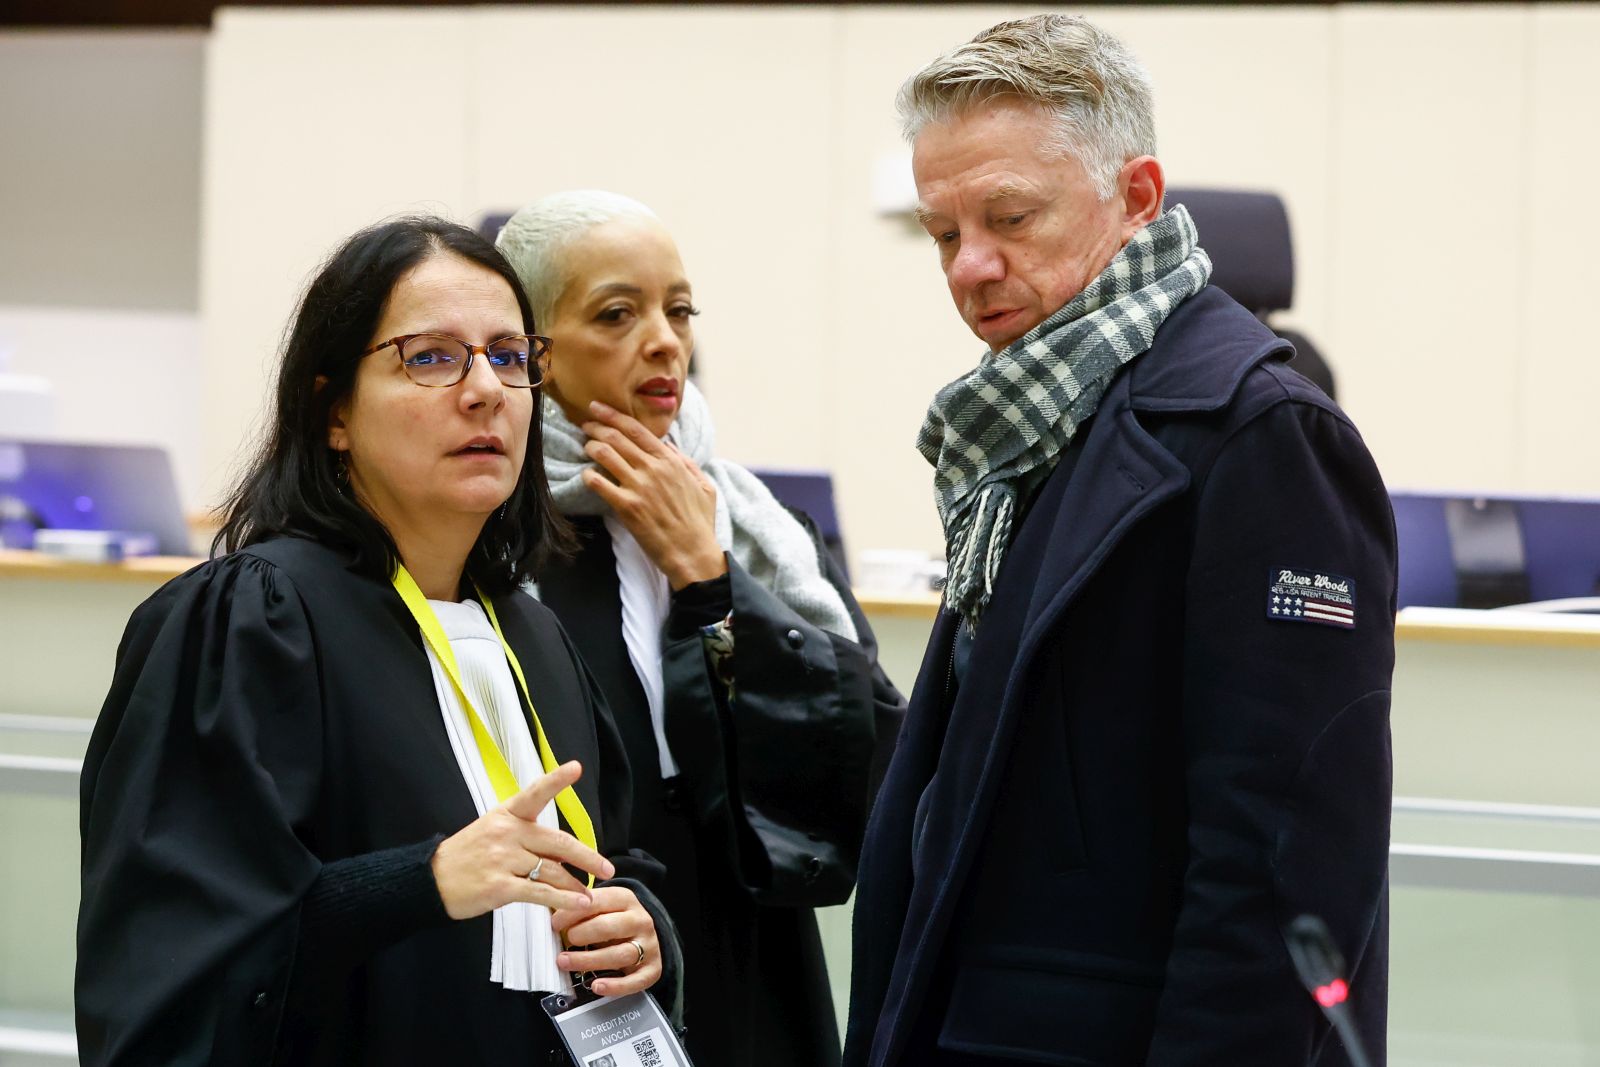 epa10338277 (L-R) Salah Abdeslam's Lawyer Delphine Paci, Gisele Stuyck, Osama Krayem's lawyer and Xavier Carrette lawyer of Ibrahim Farisi  in the courtroom prior to the selection of the jury for the 2016 Brussels and Maelbeek attacks trial at the Justitia building in Brussels, Belgium, 30 November 2022. The jury selection for the trial begins on 30 November following a delay over defendants' cubicles. The charges will be read on 05 December 2022. Nine people face terrorism charges for the terrorist attacks on Brussels airport and Maelbeek metro station on 22 March 2016, in which 32 people died and hundreds were injured.  EPA/STEPHANIE LECOCQ/ POOL POOL EPA